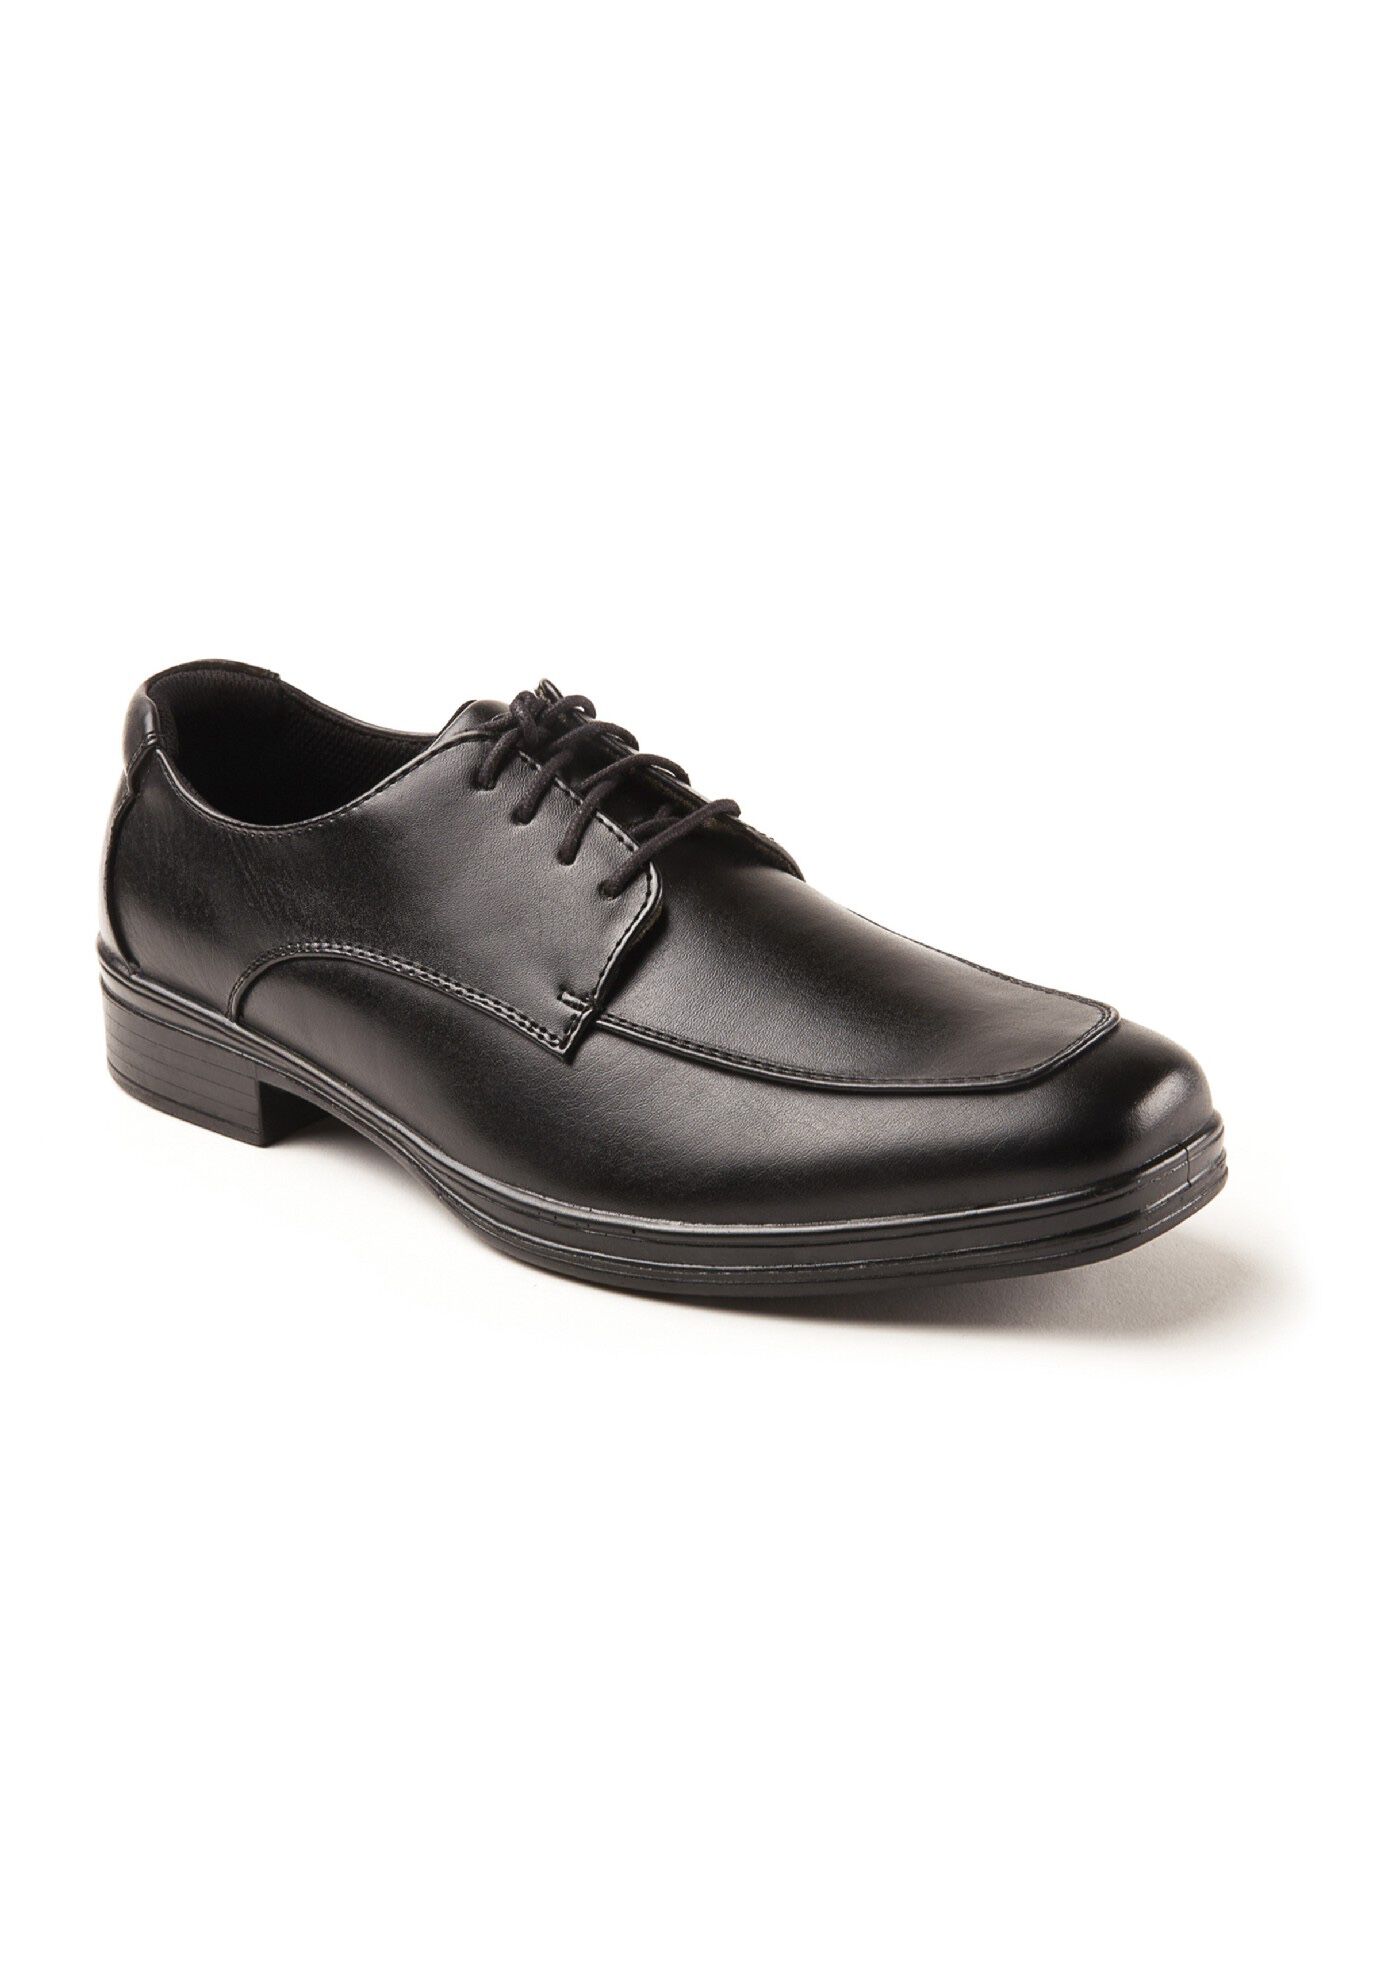 deer stags oxford shoes